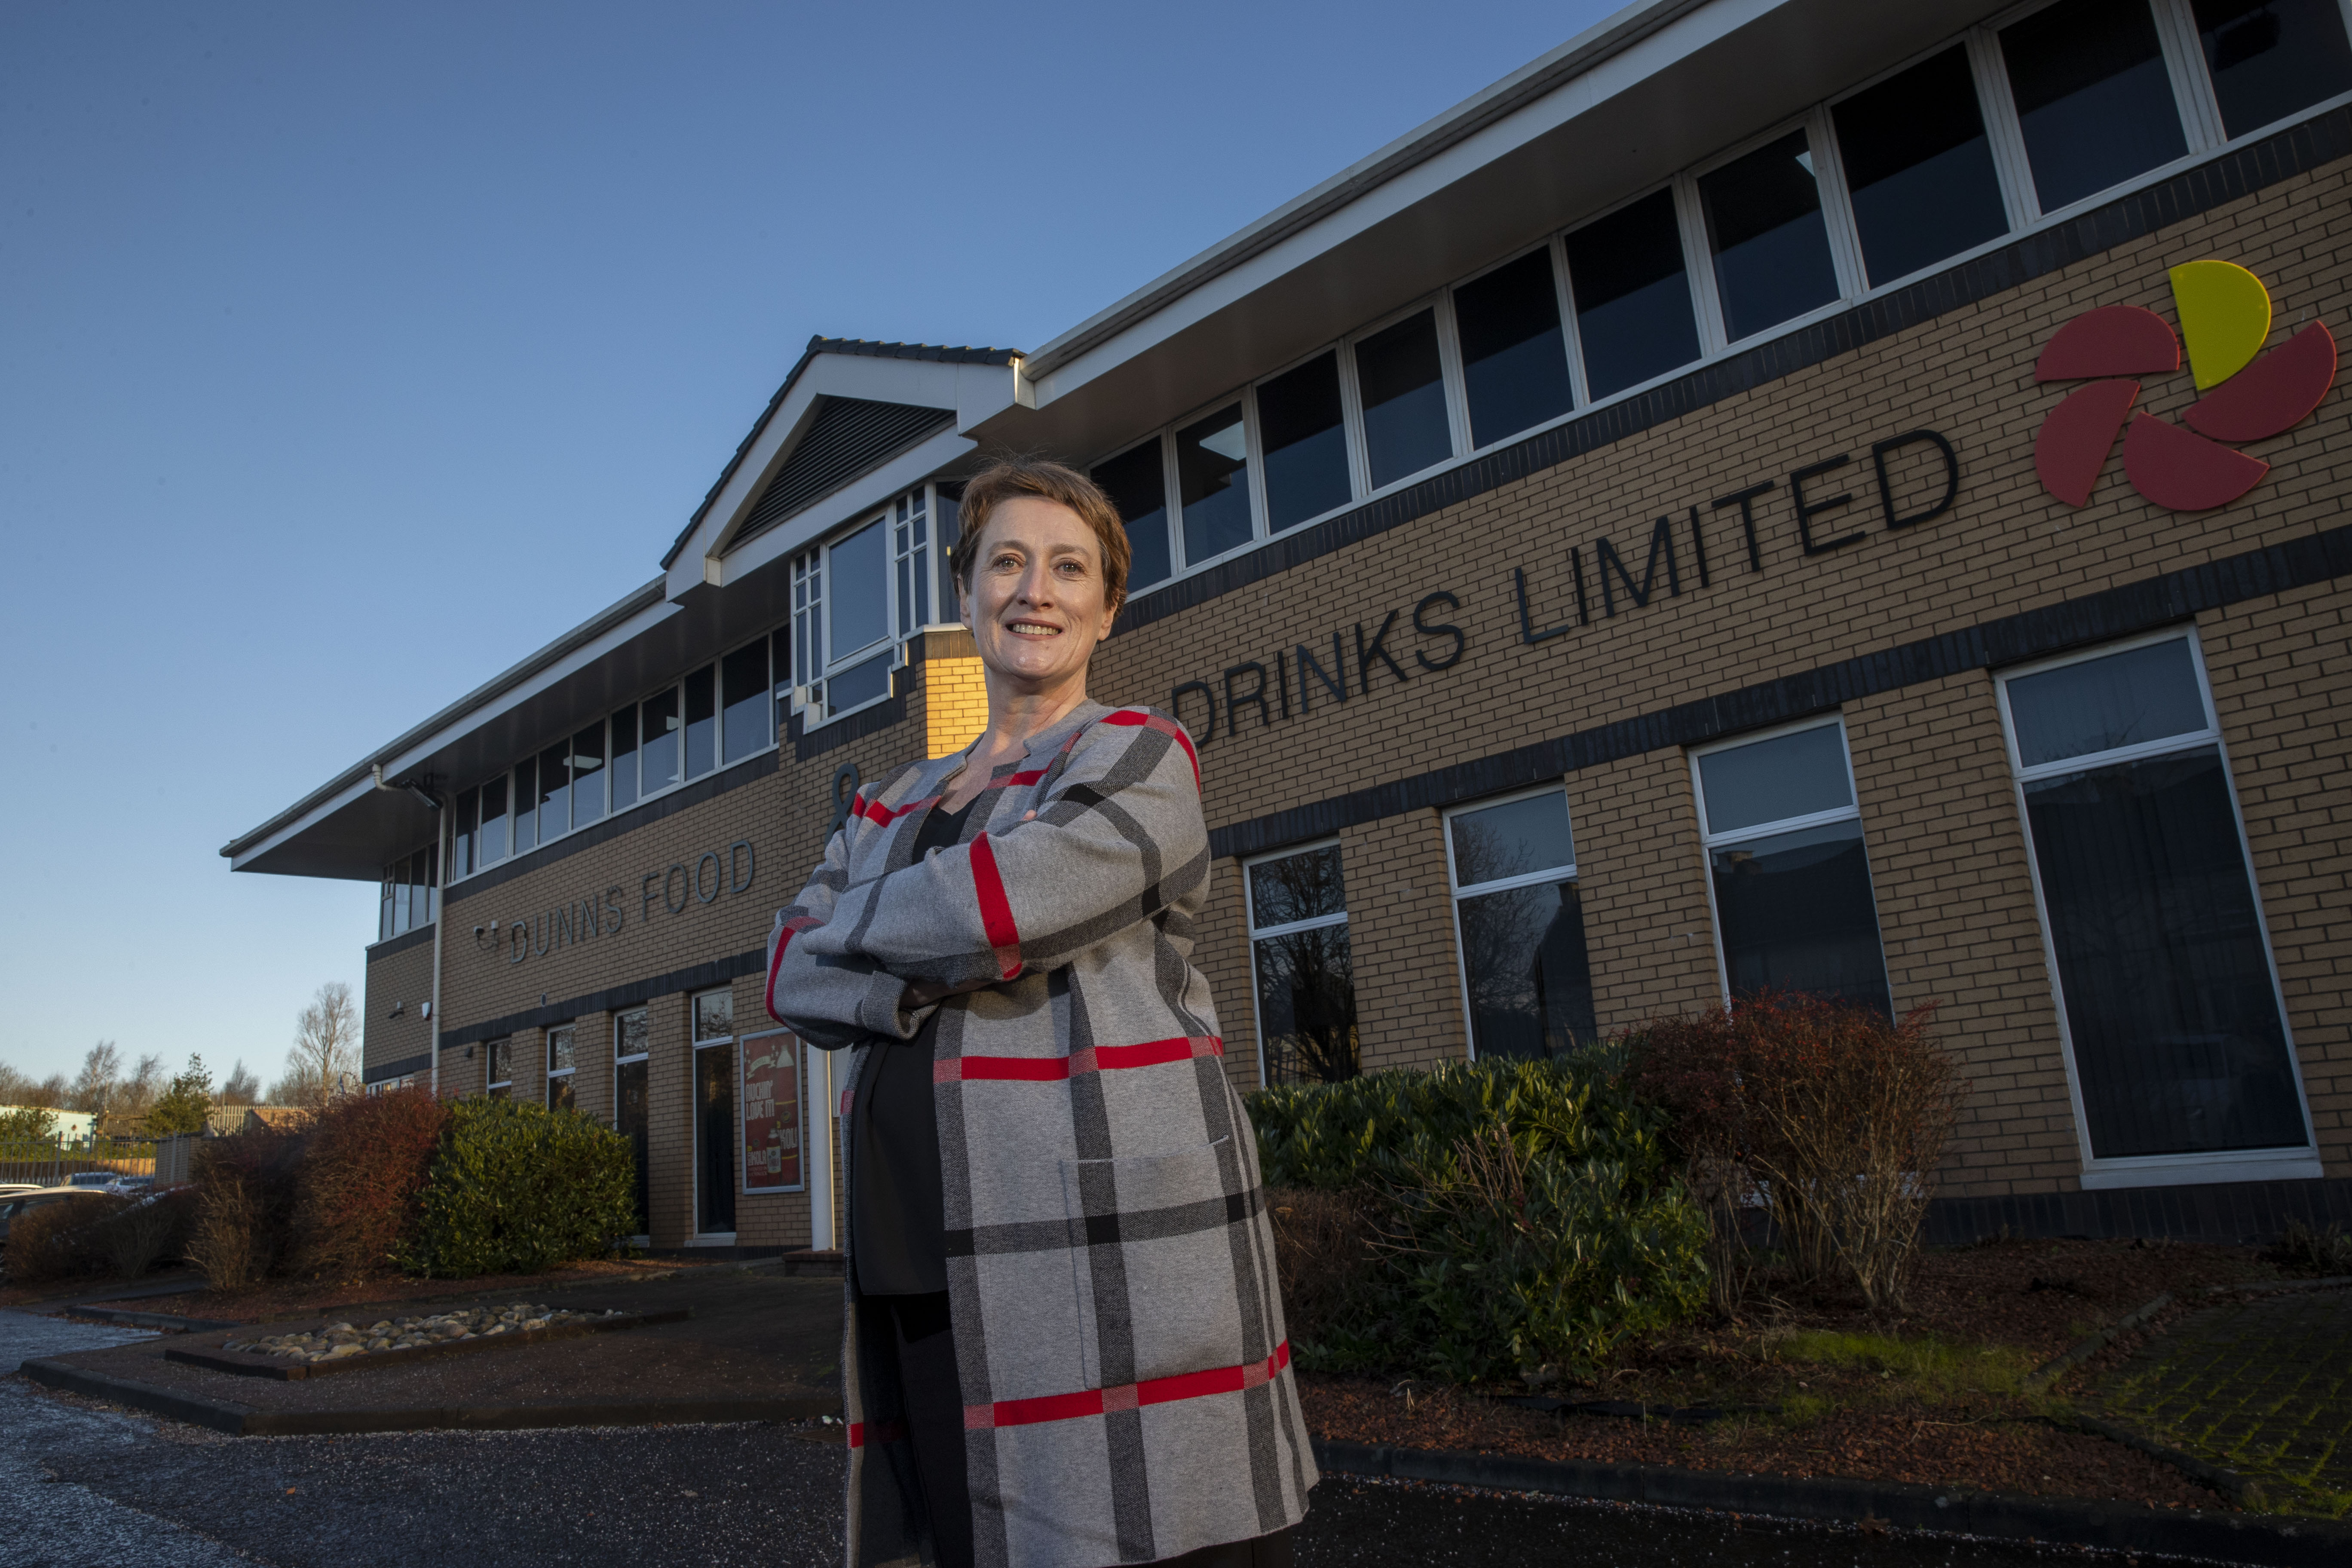 Wholesaler Dunns Food and Drinks to deliver on sustainability drive with £1.5m investment